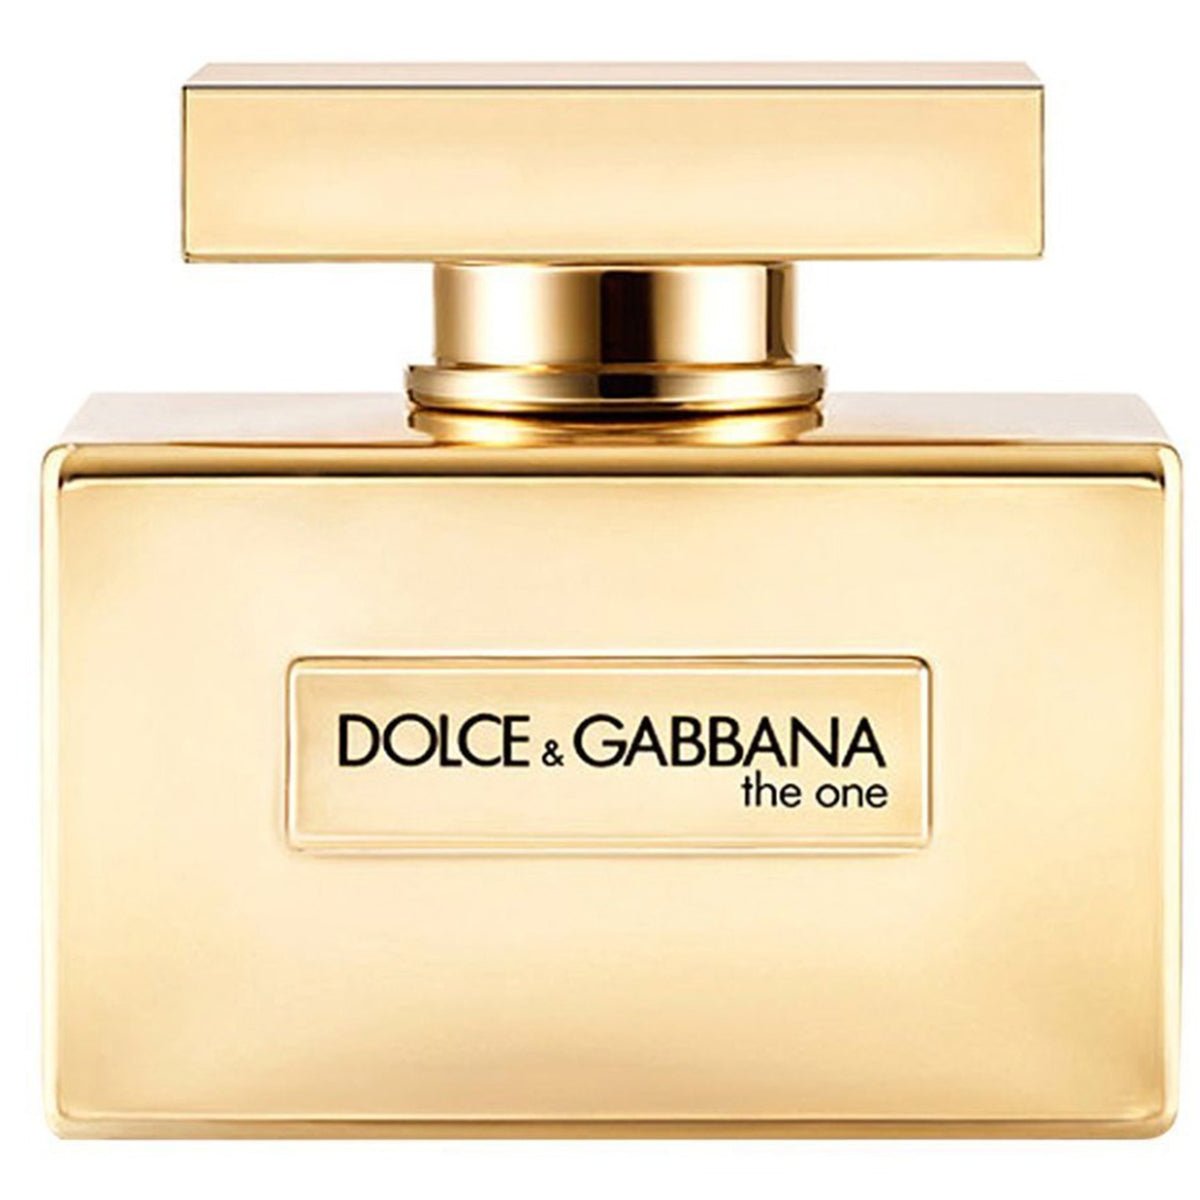 Dolce & Gabbana The One 2014 Edition Perfume Edp For Women 75 Ml-Perfume - AllurebeautypkDolce & Gabbana The One 2014 Edition Perfume Edp For Women 75 Ml-Perfume